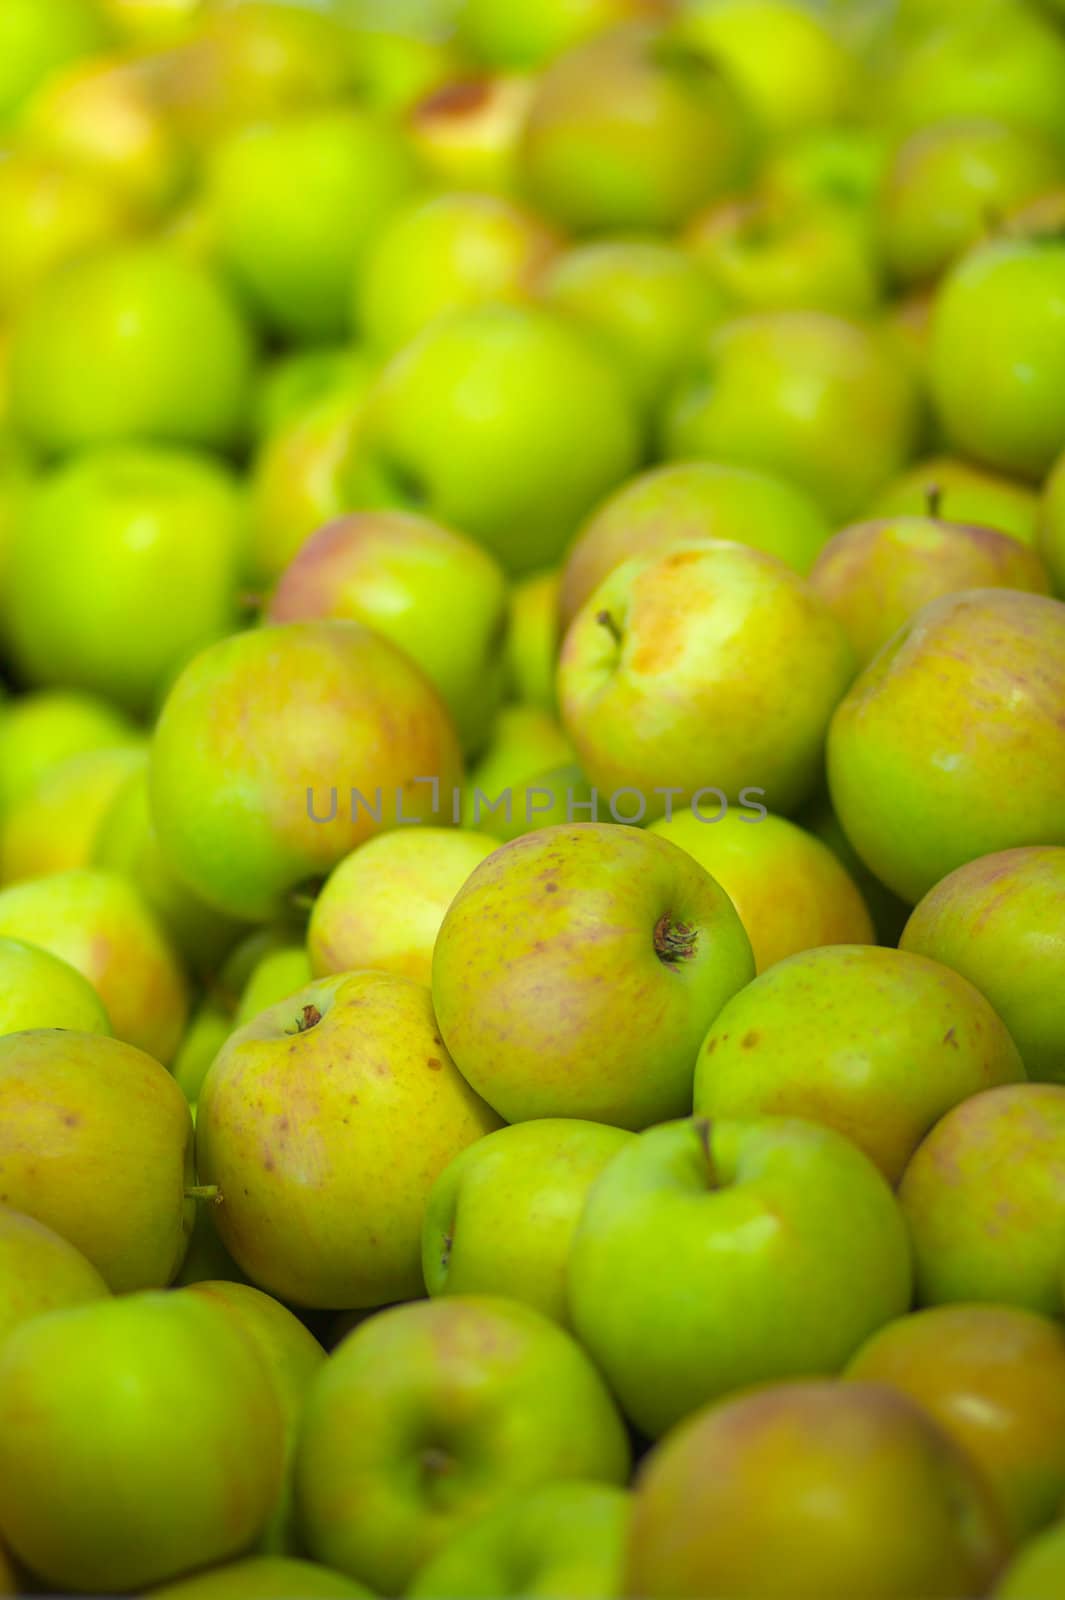 a pile of green apples at a California fruit market with soft focus background